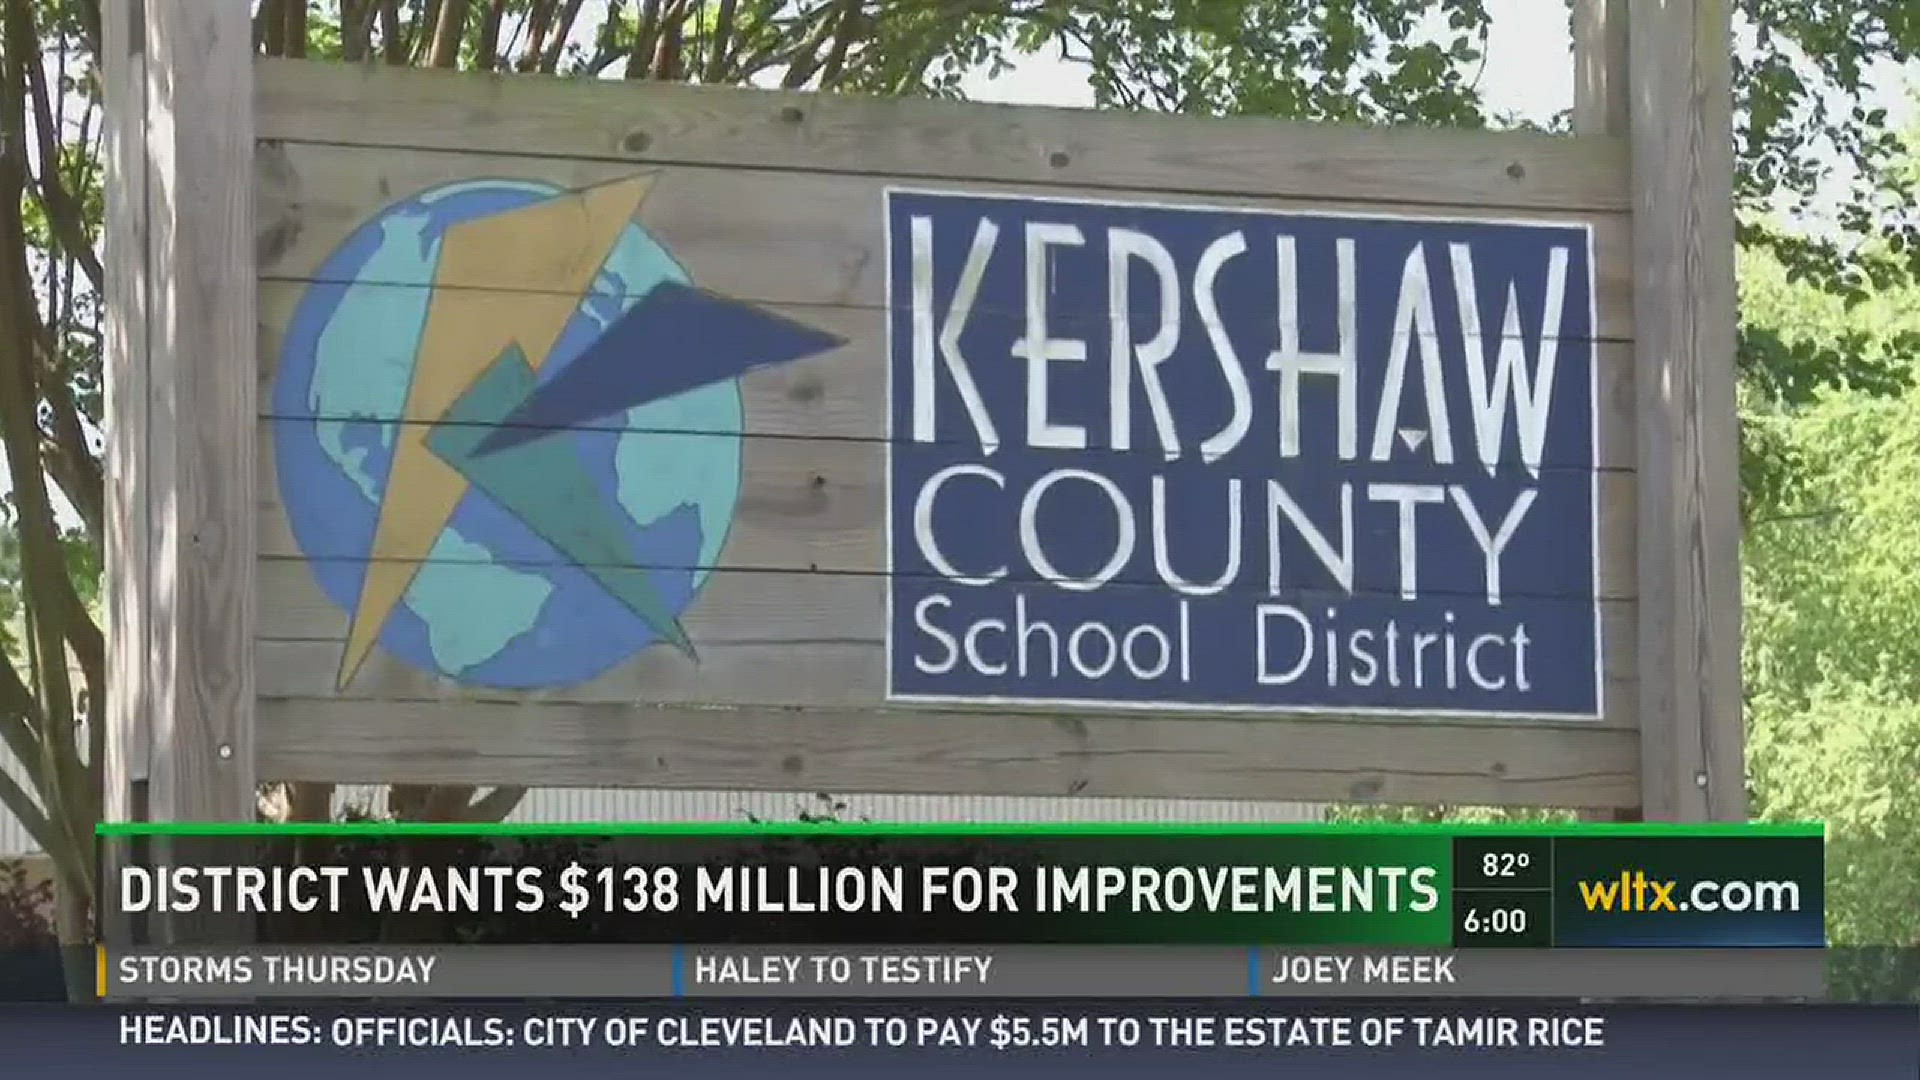 Kershaw County schools wants voters to approve measures to allow upgrades to local schools.